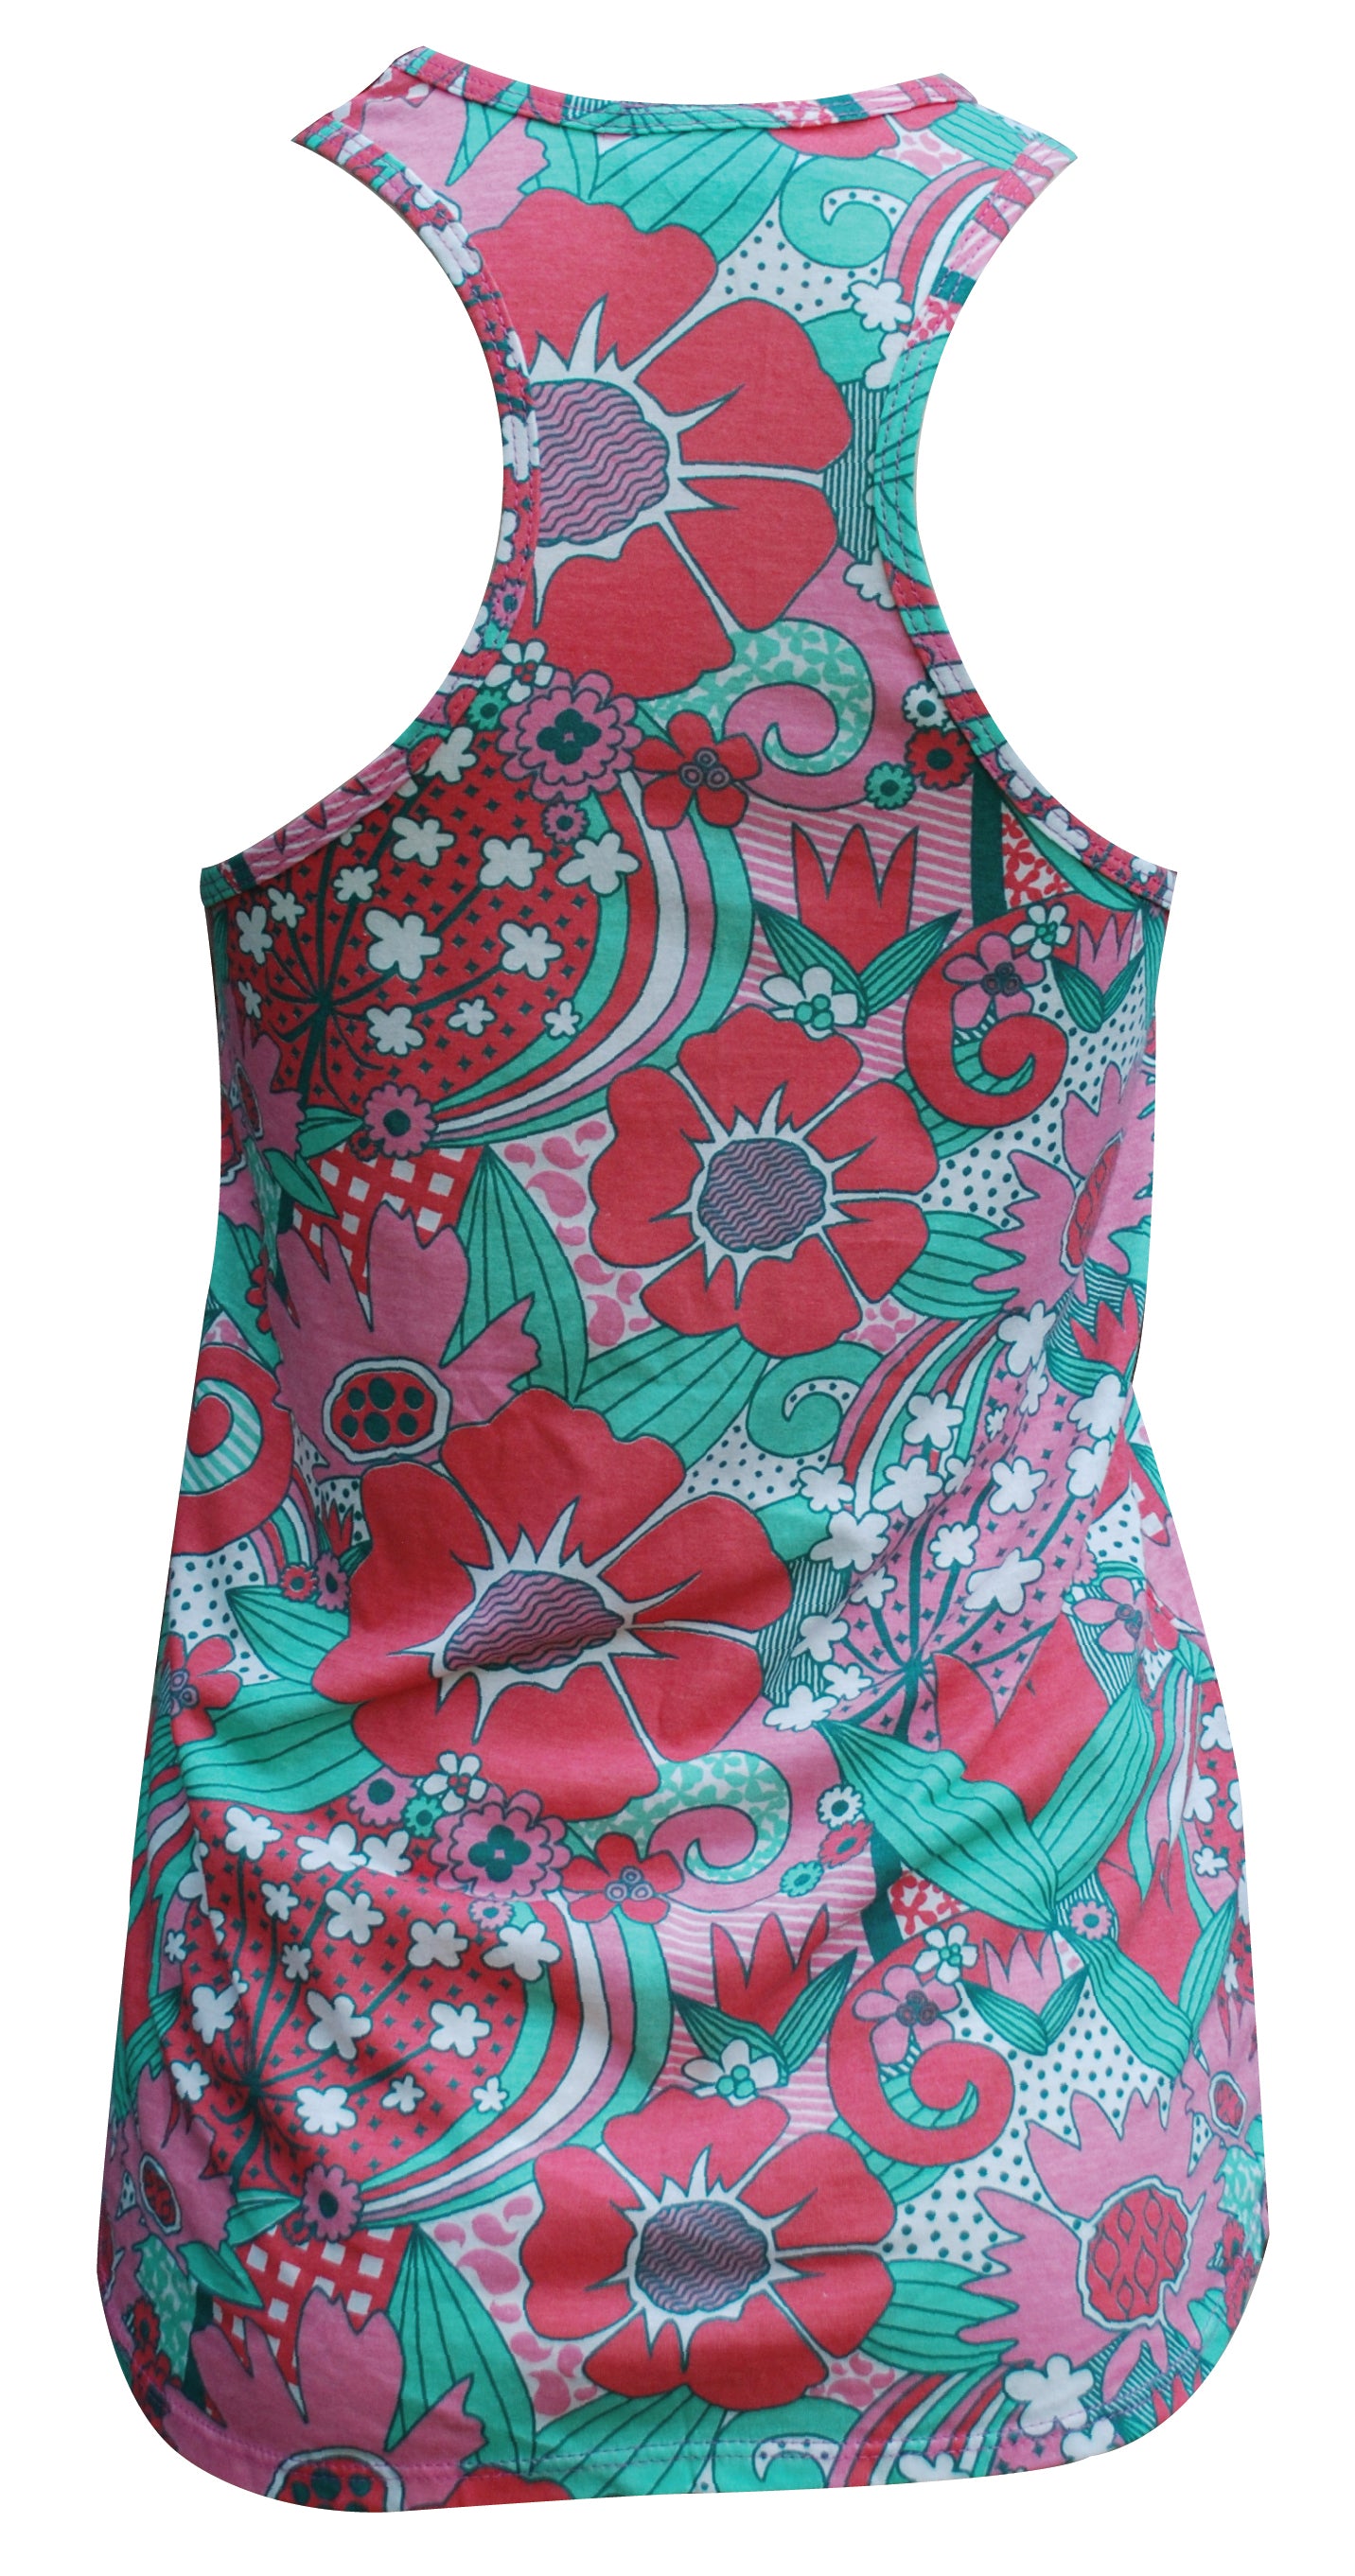 Back view of pink and green floral racerback tank